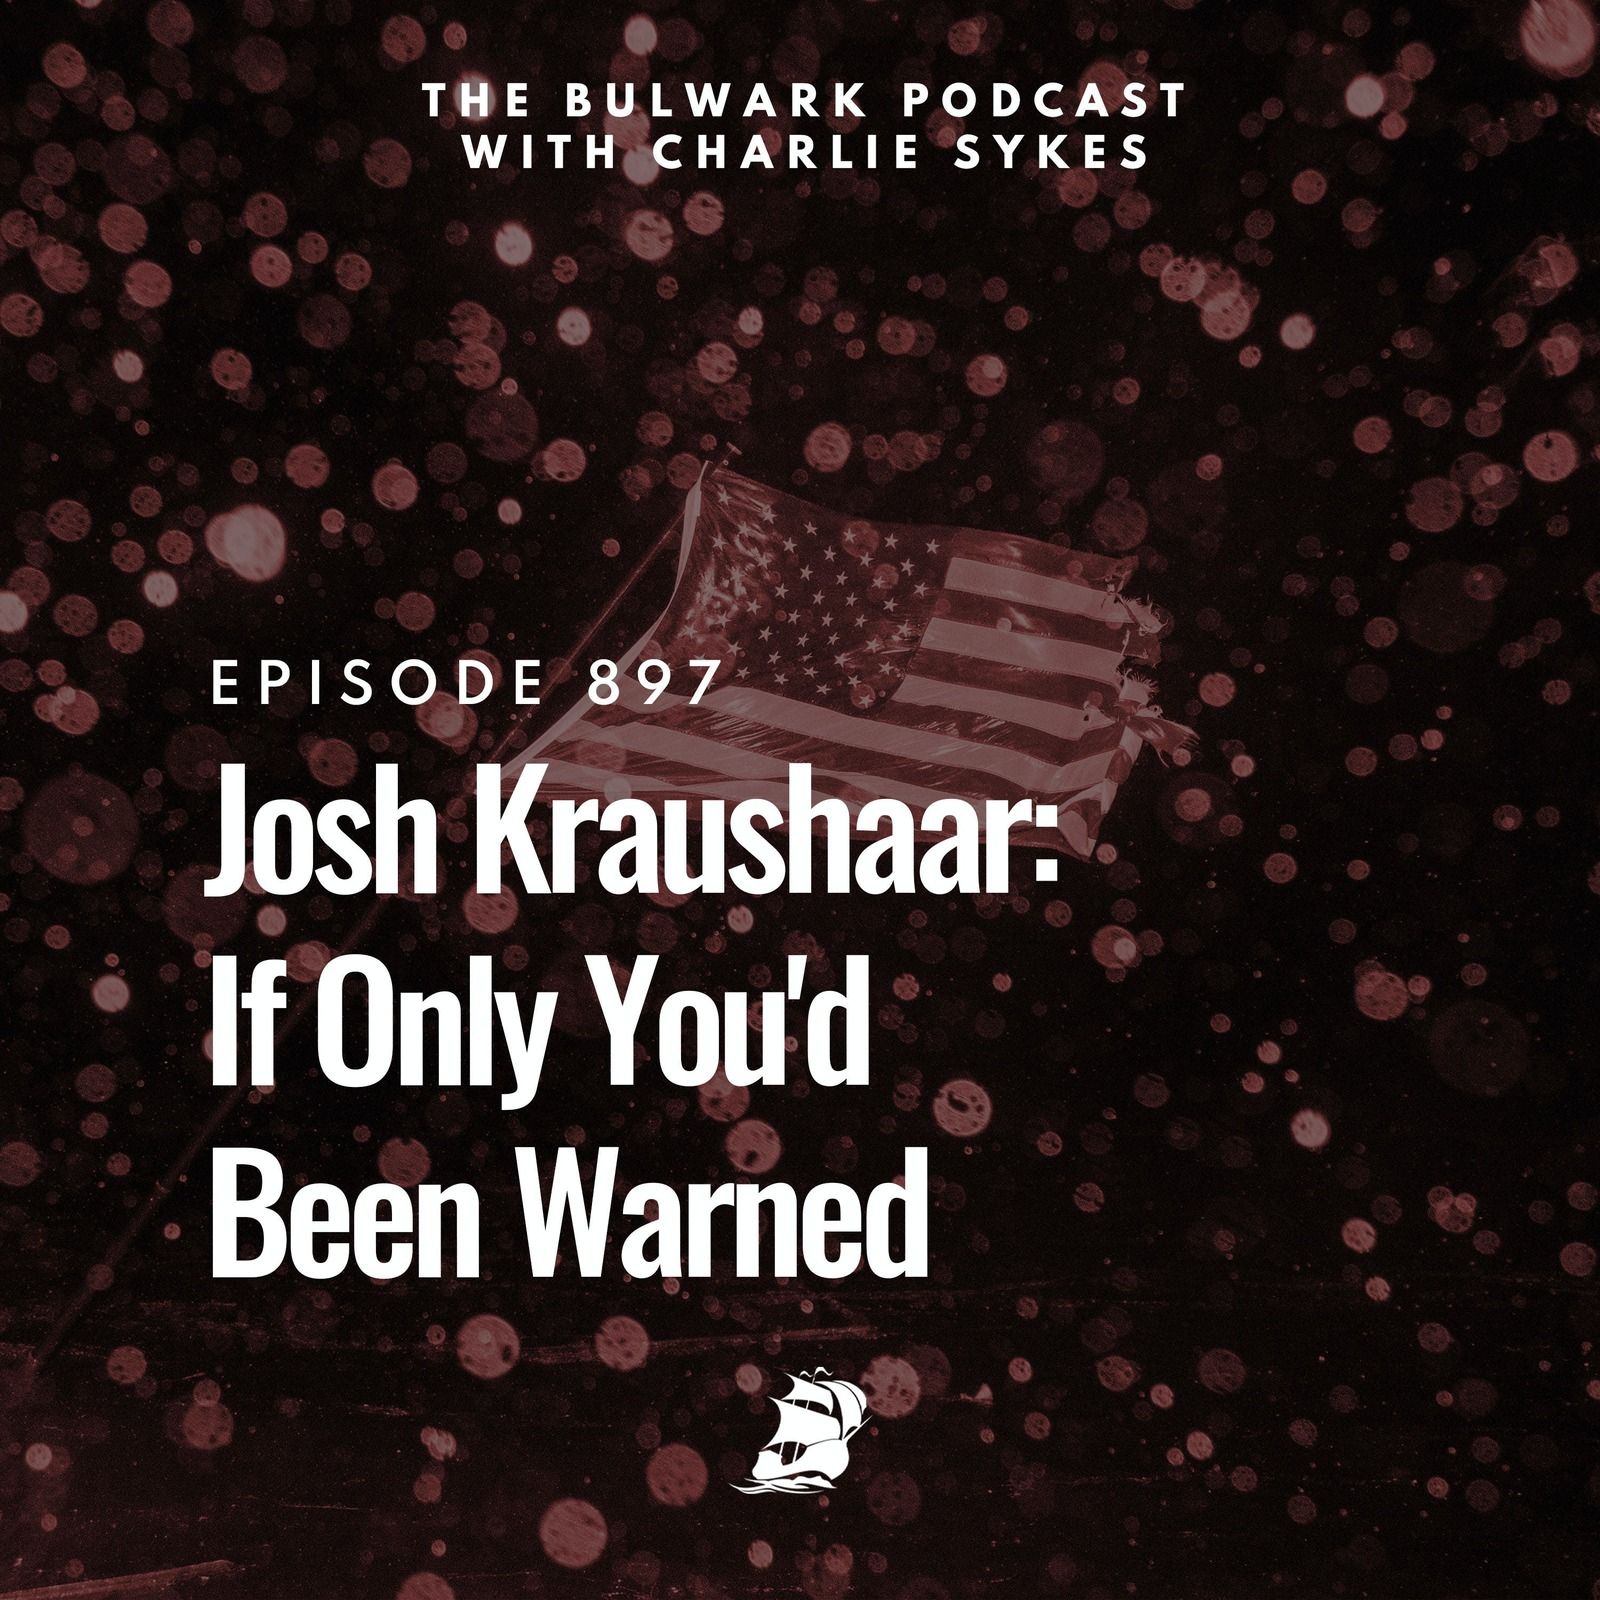 Josh Kraushaar: If Only You'd Been Warned by The Bulwark Podcast